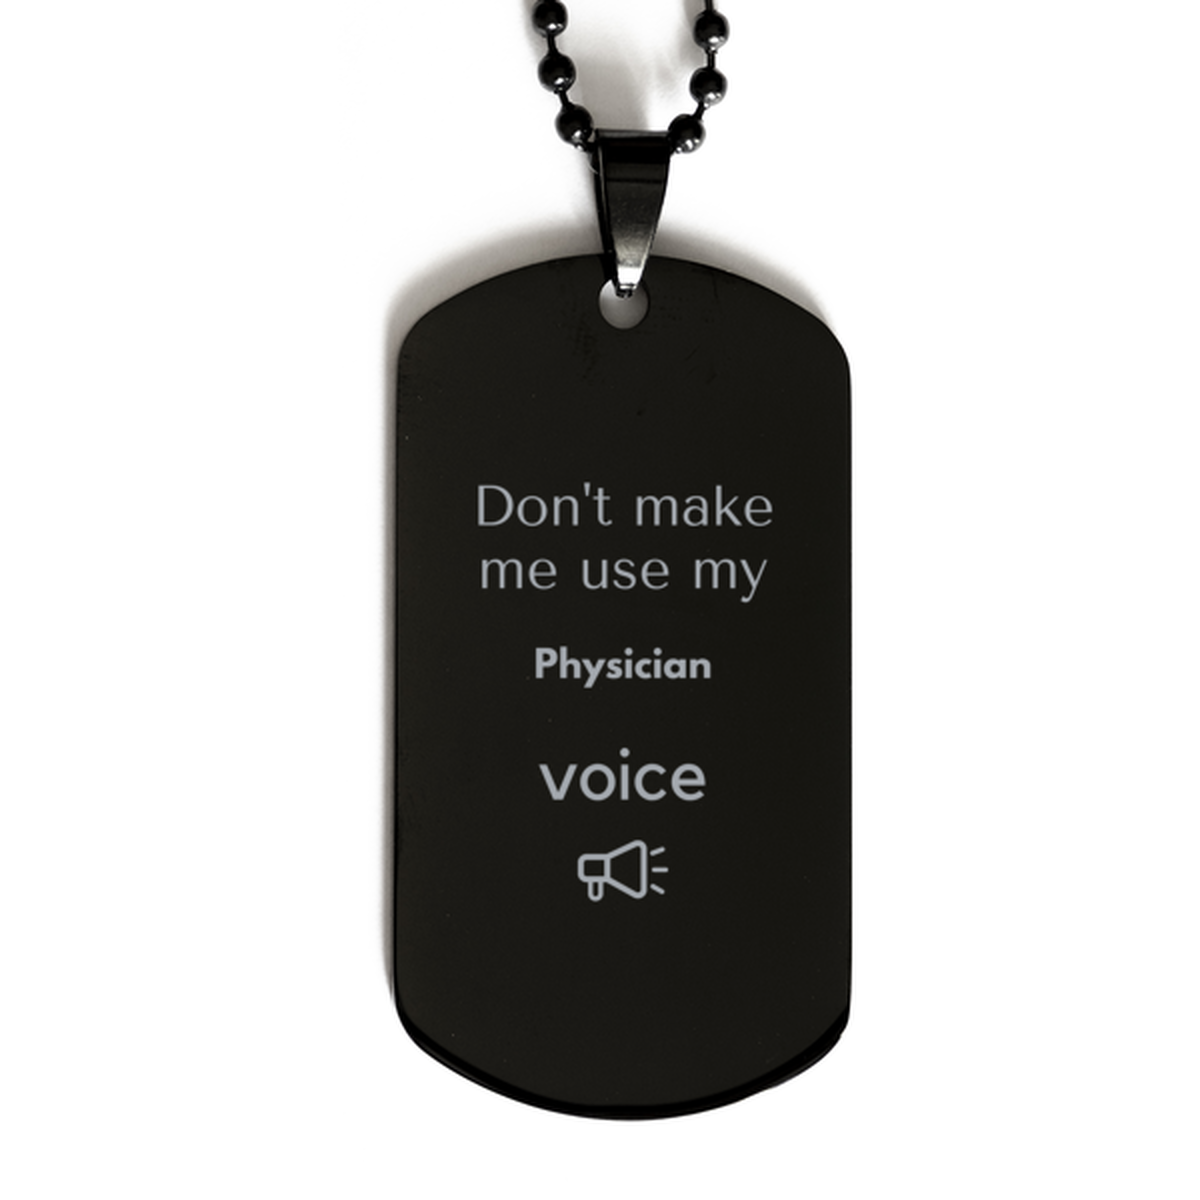 Don't make me use my Physician voice, Sarcasm Physician Gifts, Christmas Physician Black Dog Tag Birthday Unique Gifts For Physician Coworkers, Men, Women, Colleague, Friends